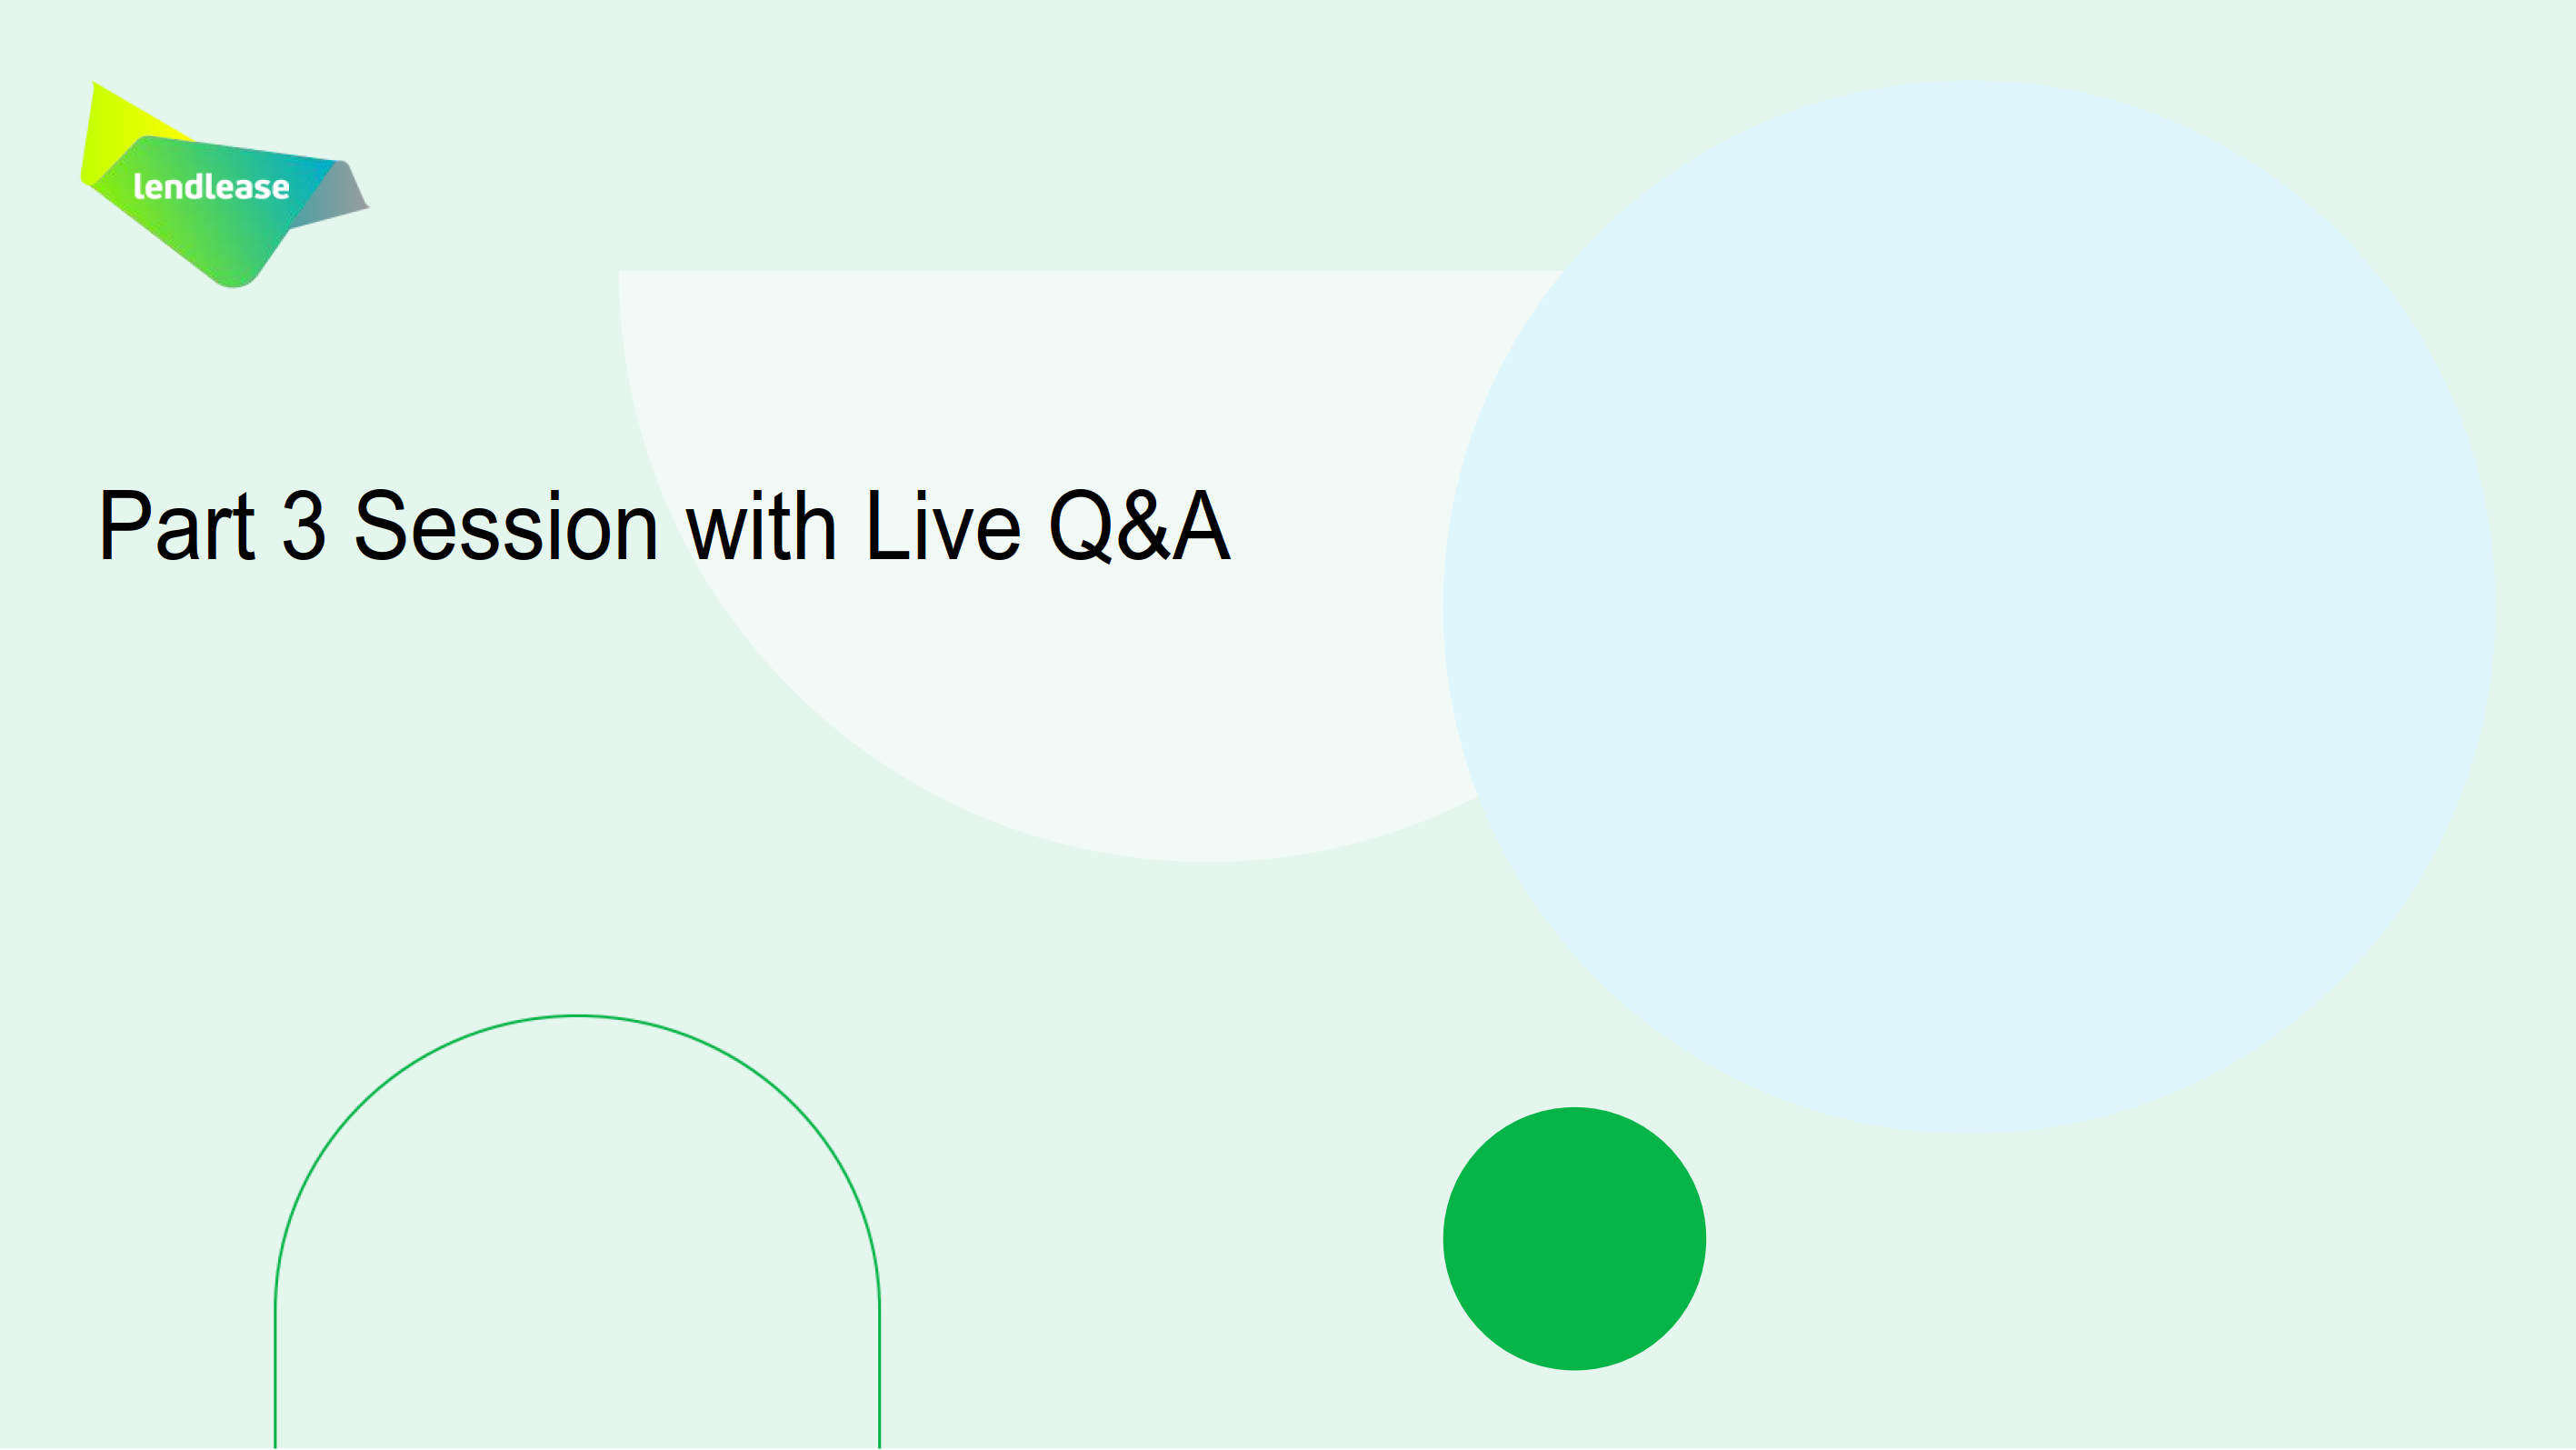 Part 3 Session with Live Q&A